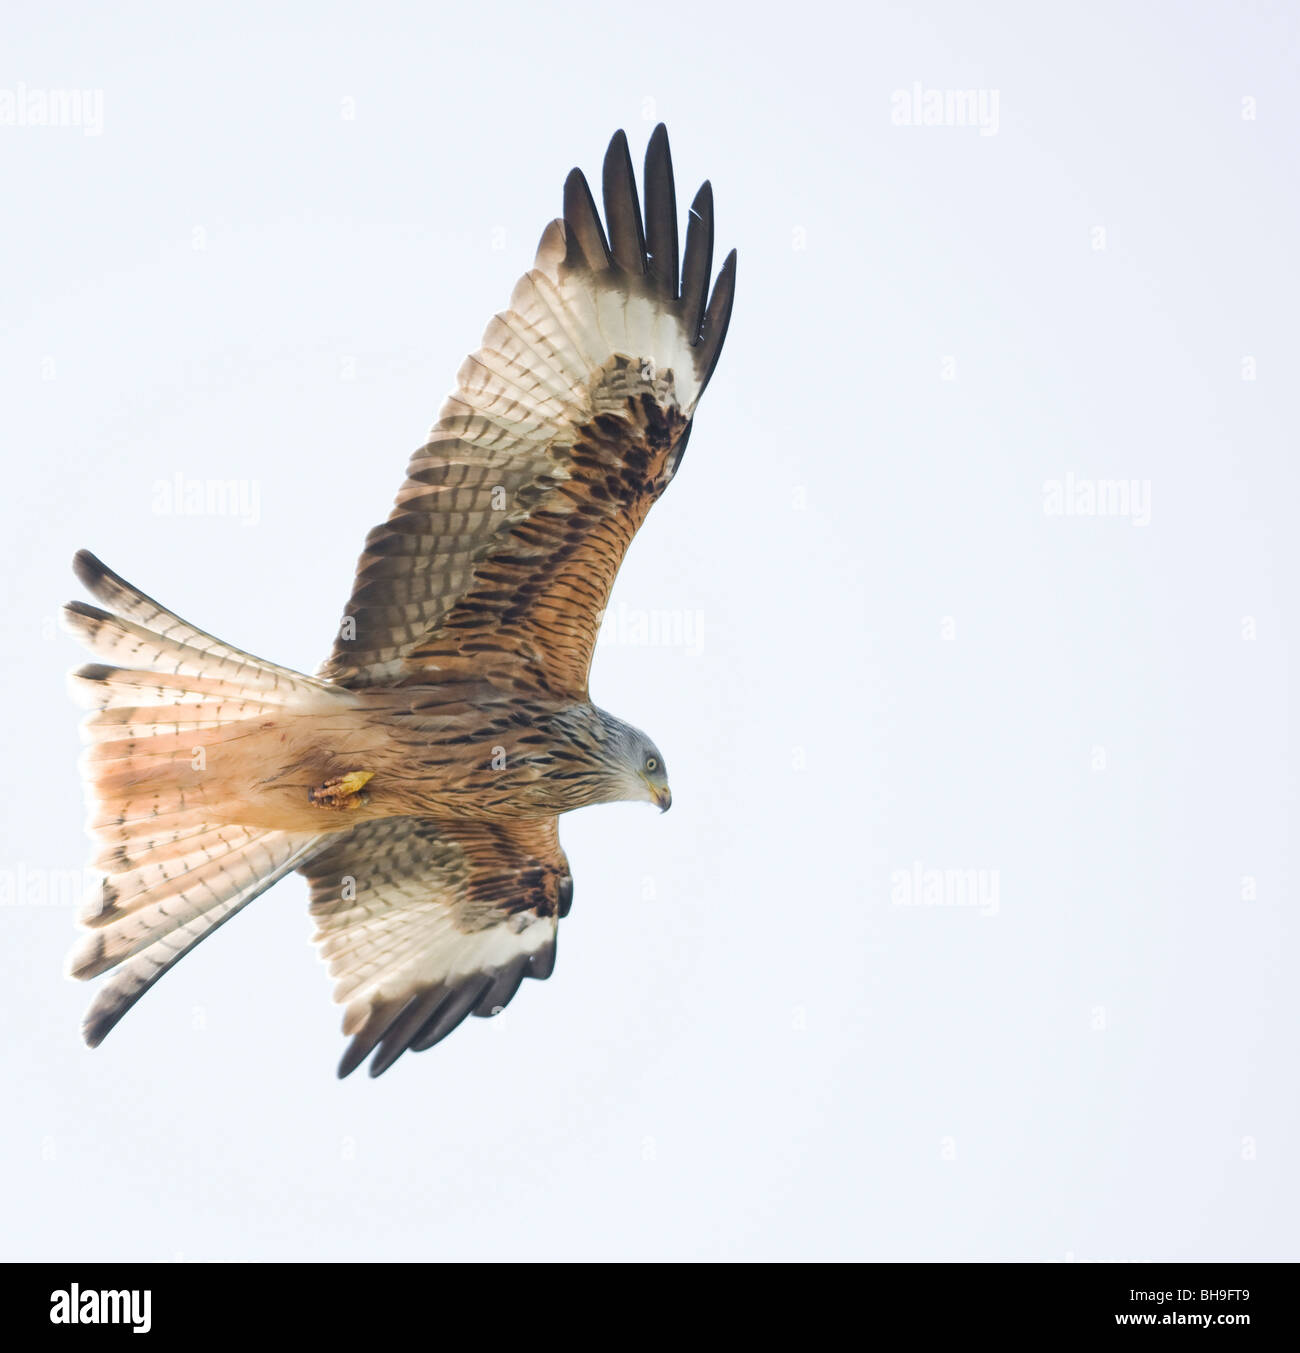 A single red kite, Milvus Milvus, with its wings outspread prepares looks for food as it soars against a pale grey winter sky Stock Photo